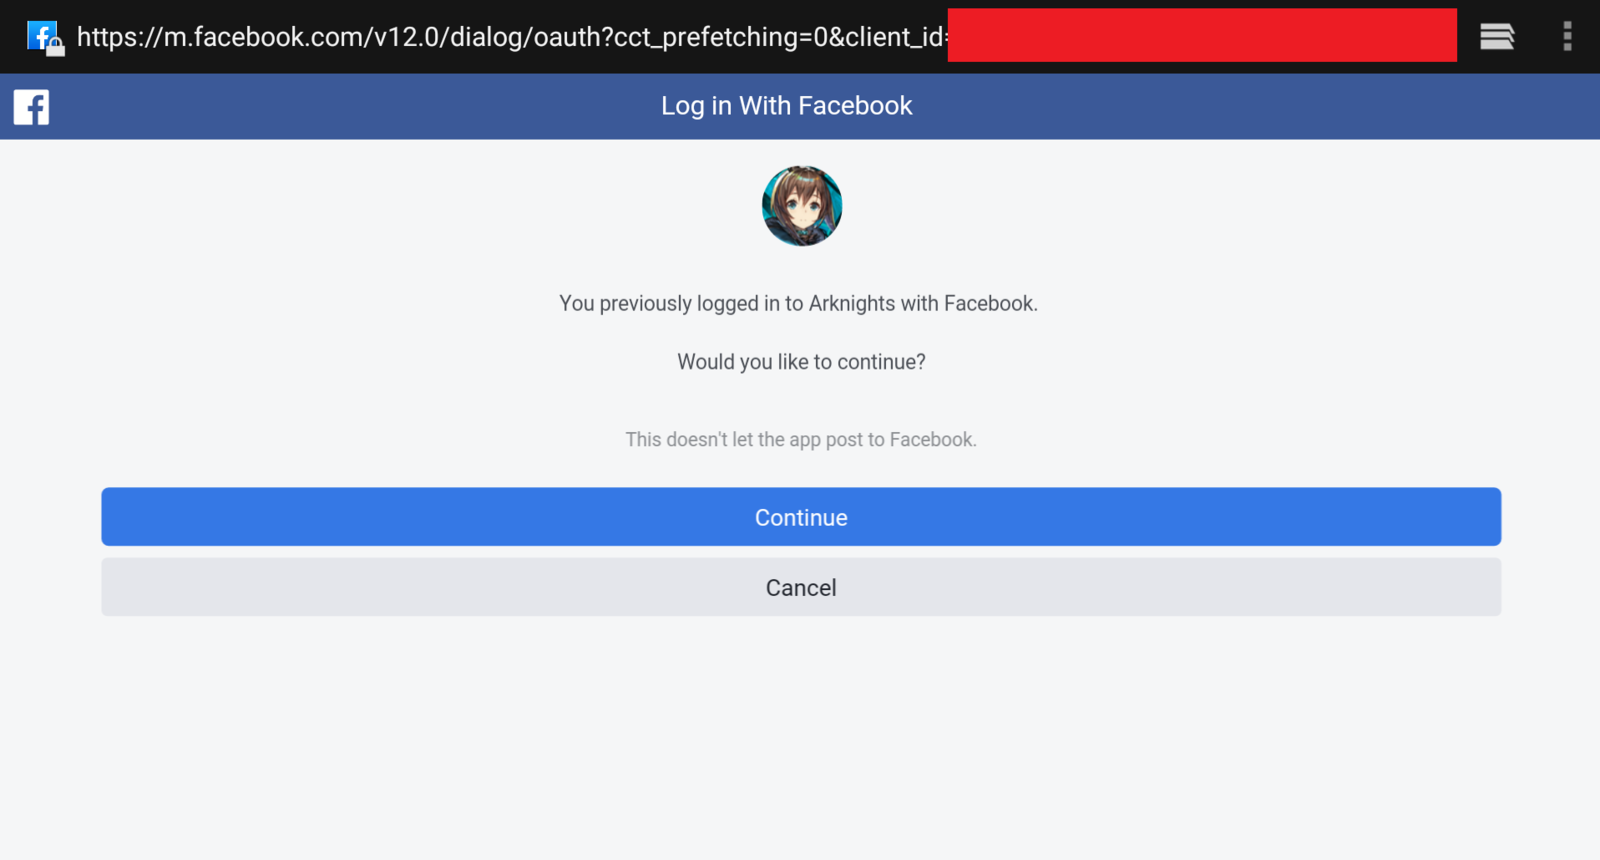 Fix for your account security logging into facebook from an embedded  browser is disabled 